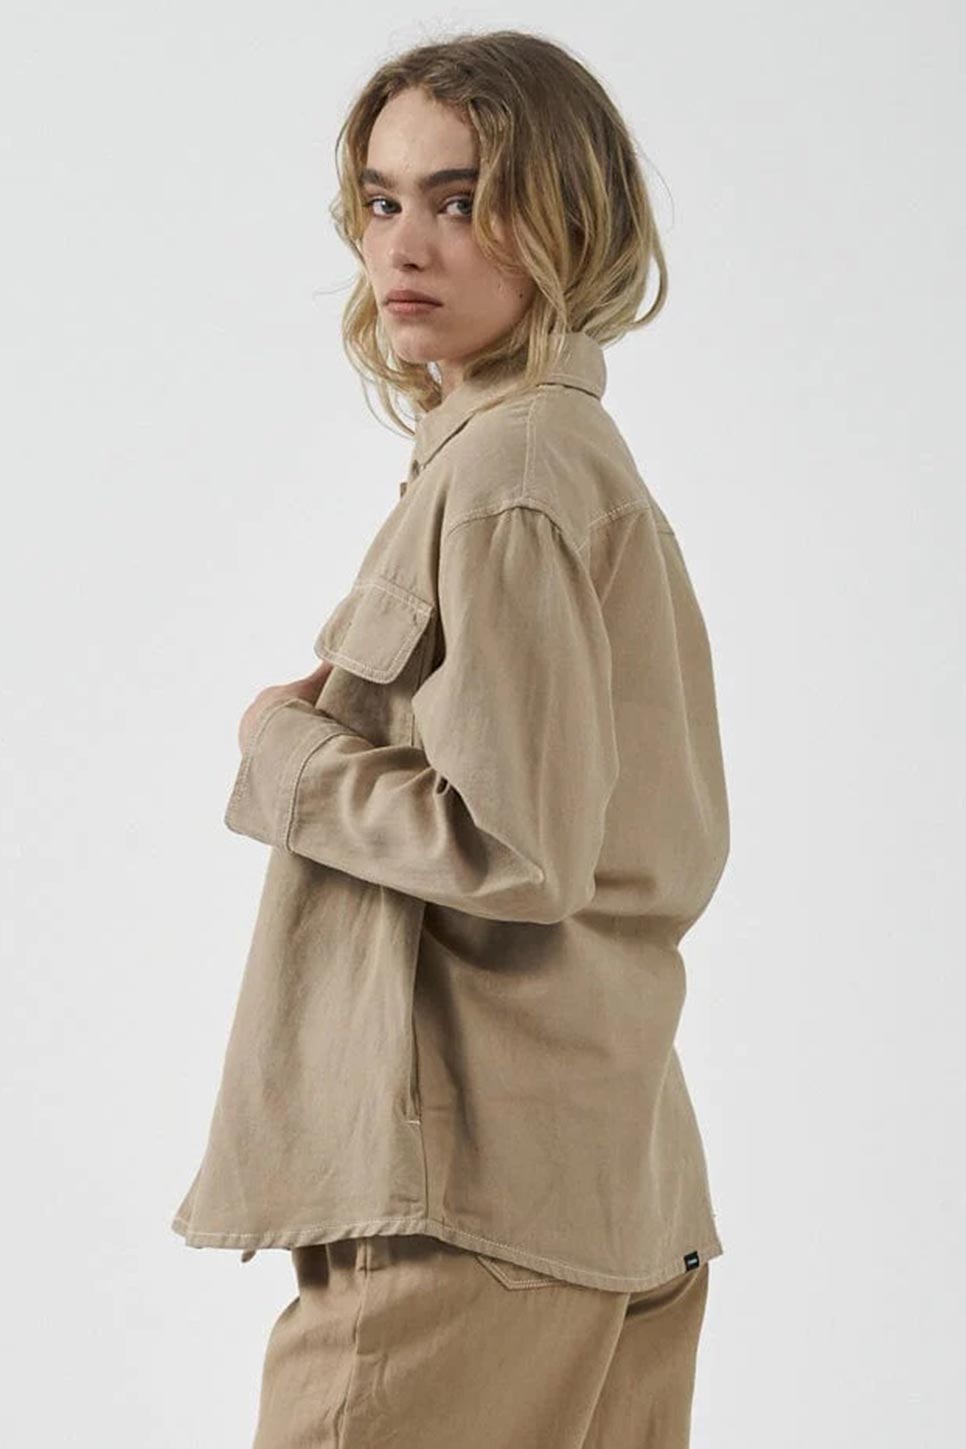 Thrills - Discover Overshirt - Faded Khaki - Side